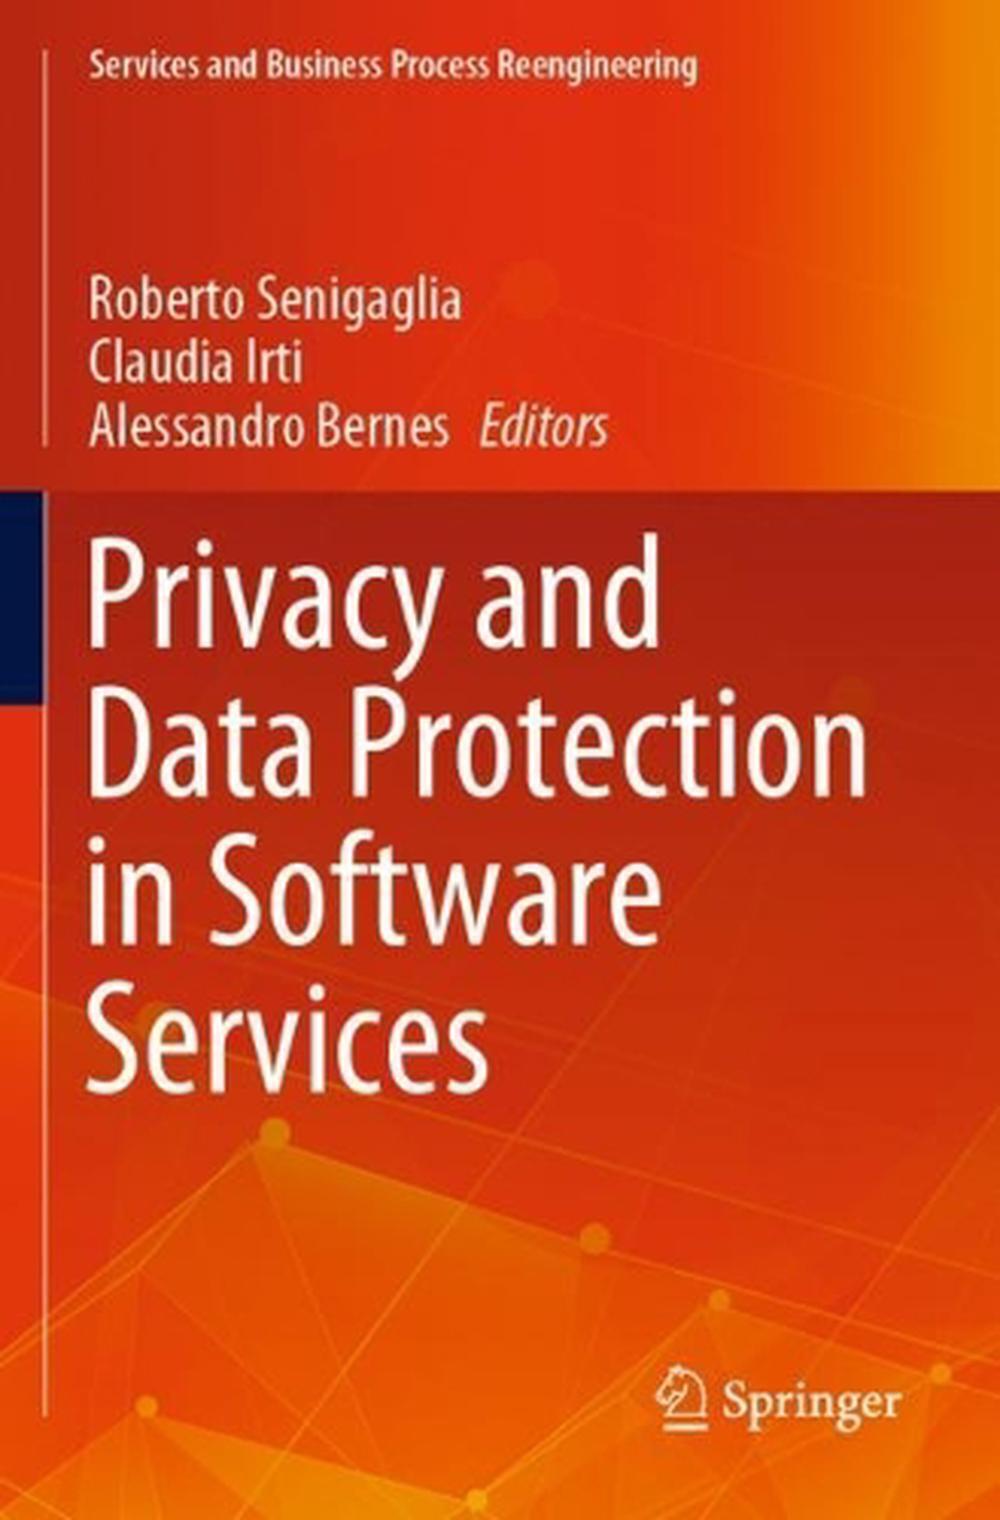 Privacy and Data Protection in Software Services by Roberto Senigaglia (English)